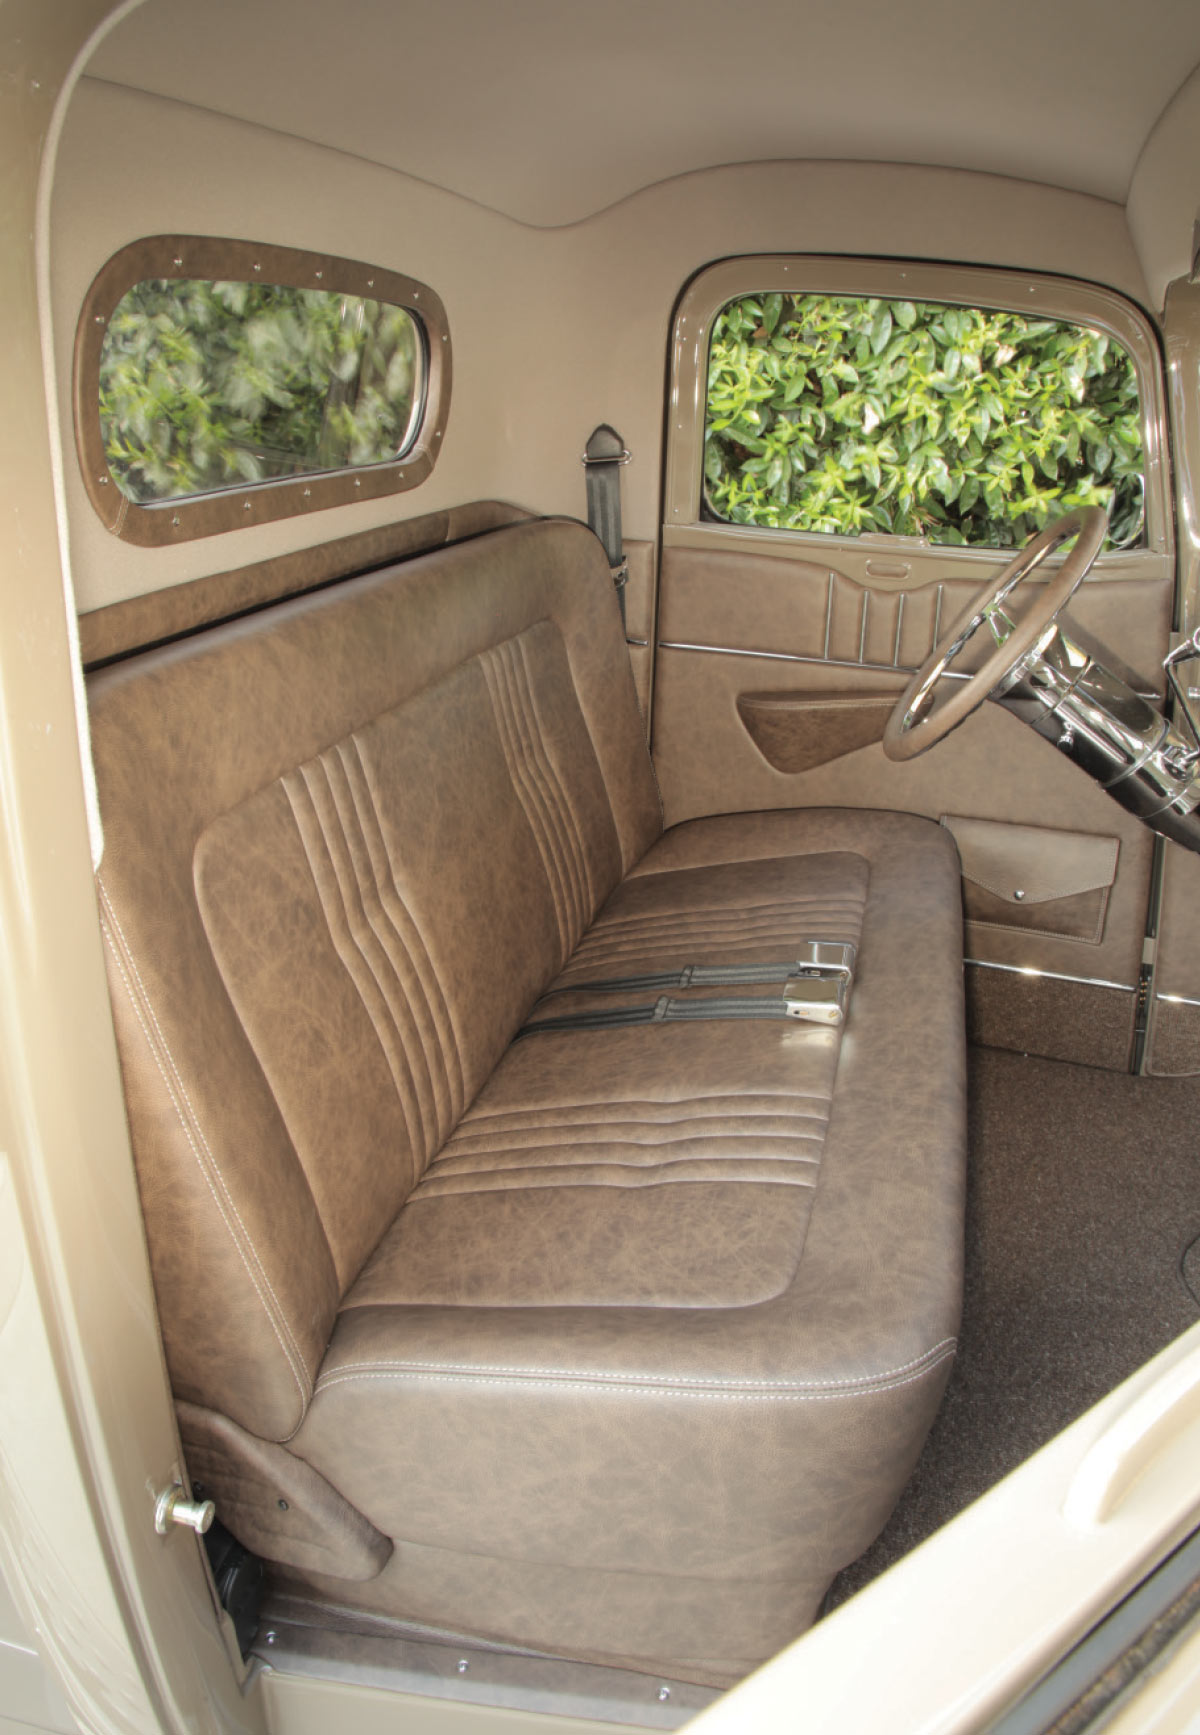 1936 Chevy Pickup's leather seats